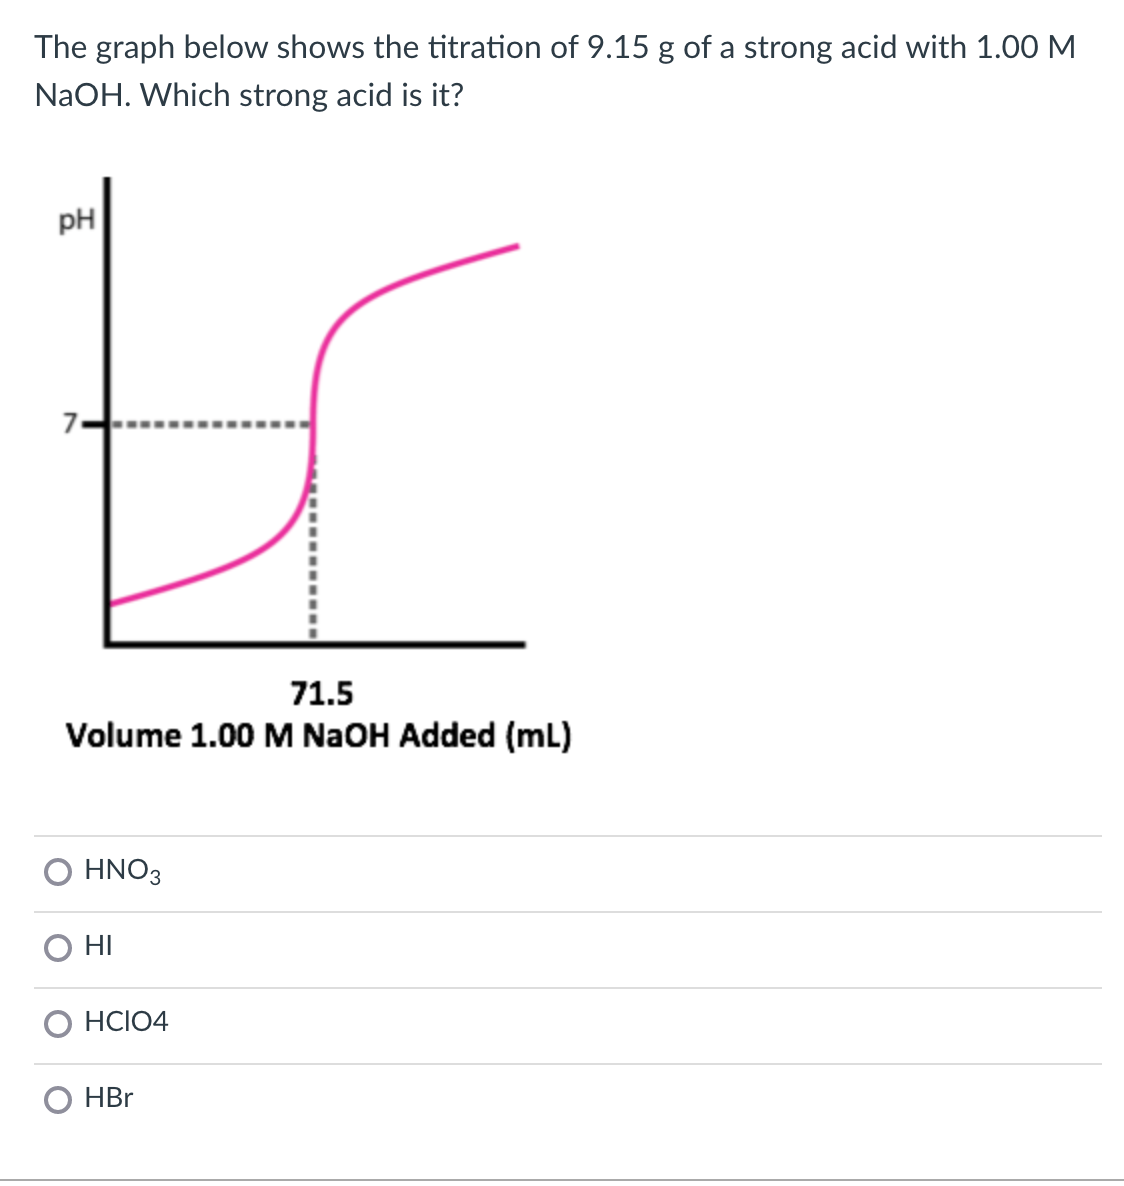 The graph below shows the titration of 9.15 g of a strong acid with 1.00 M
NaOH. Which strong acid is it?
tr
pH
71.5
Volume 1.00 M NaOH Added (mL)
O HNO3
O HI
HCIO4
HBr